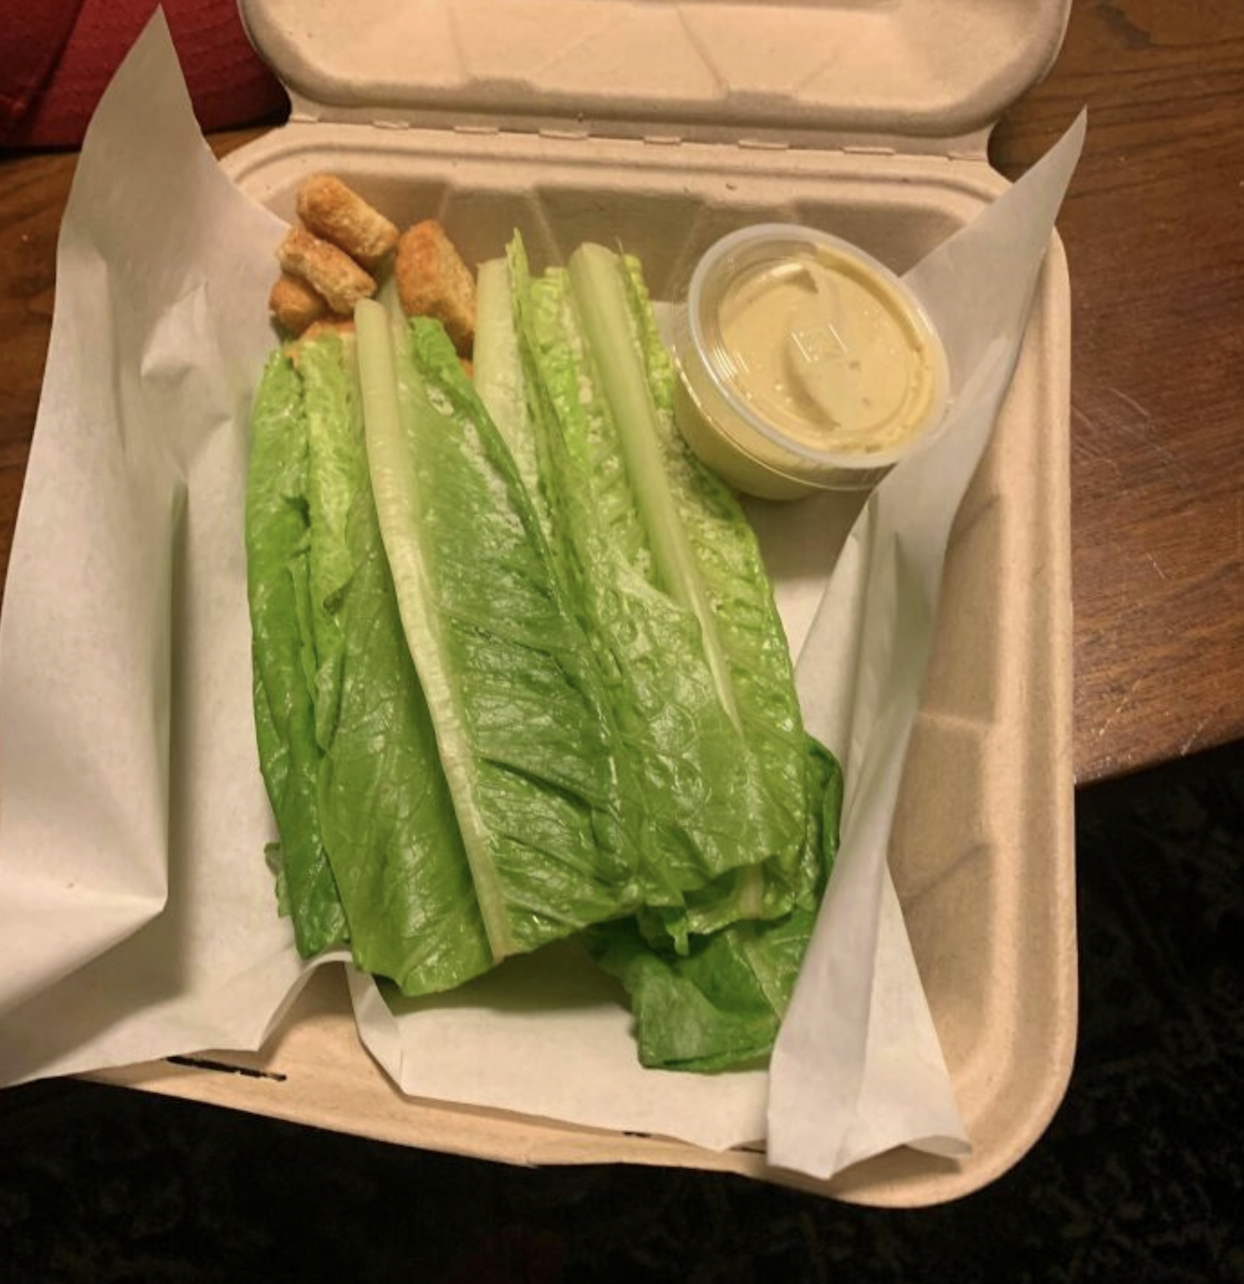 Ordered Caesar salad for $15 from one of the local restaurants.